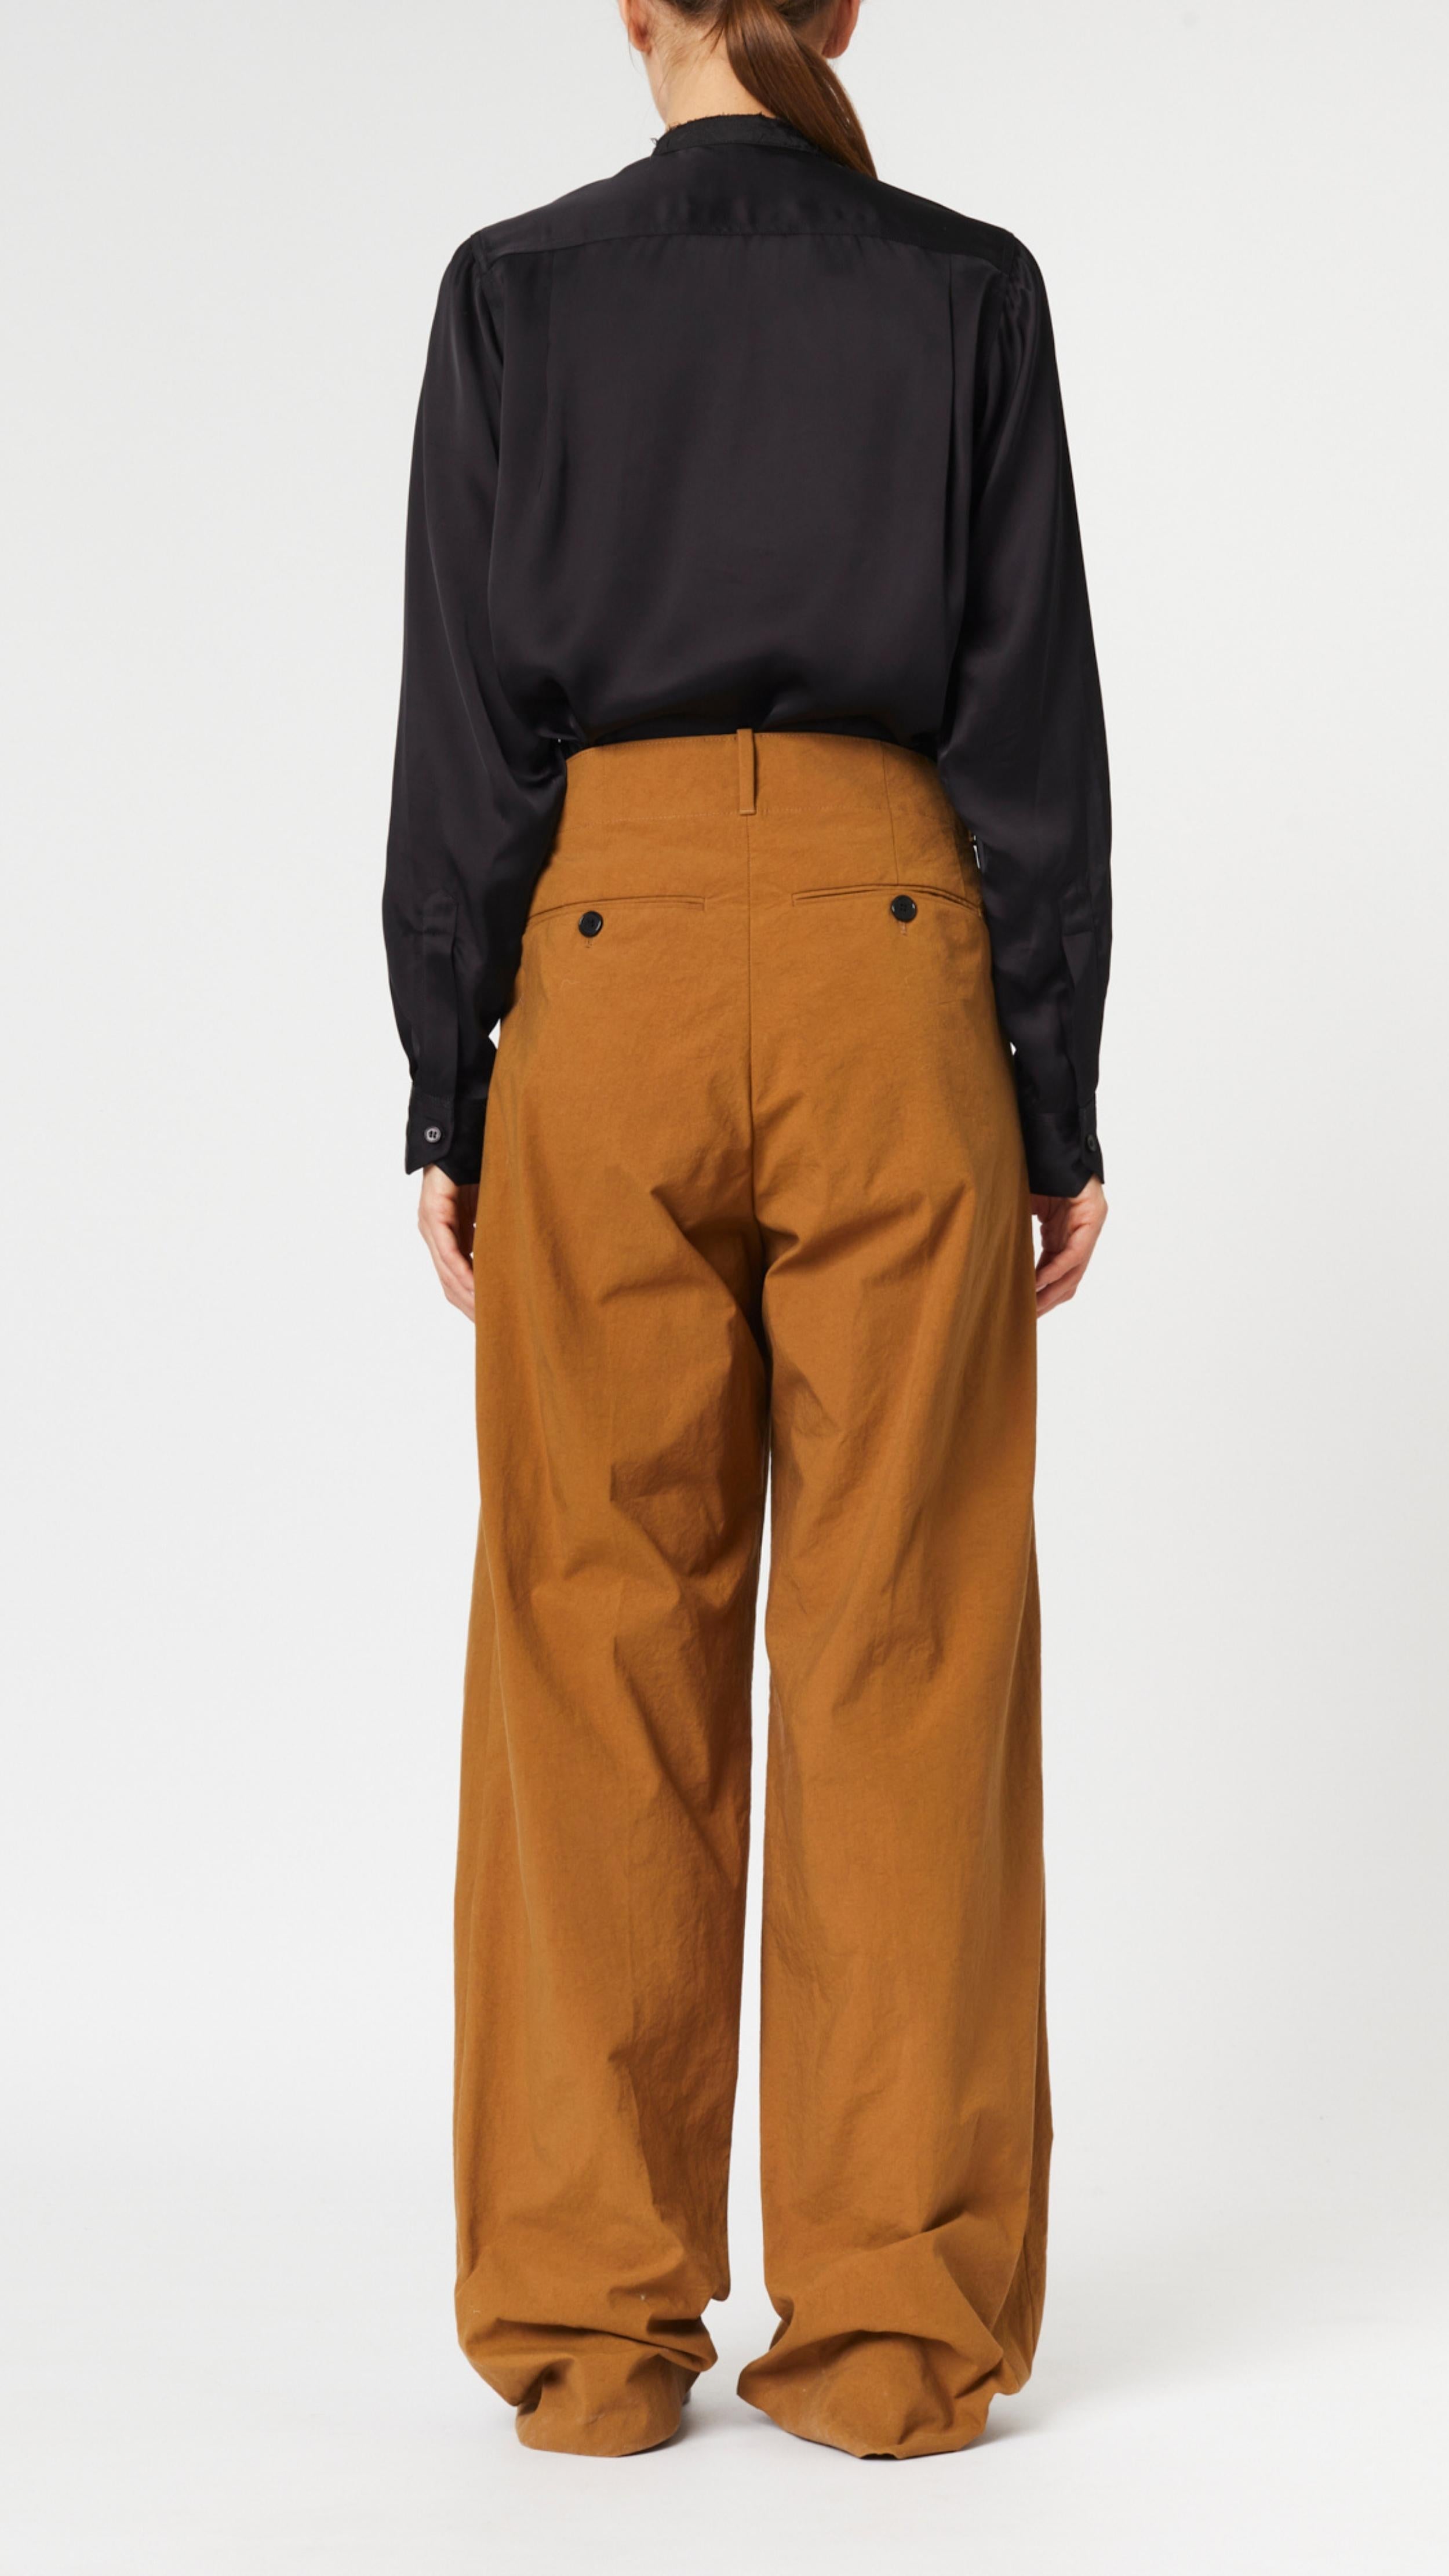 Plan C Camel Boyfriend Trouser in Nylon. Slightly oversized style with high waist and double button front closure. Pleated front panels and loose fit. Photo shown on model facing bacj.